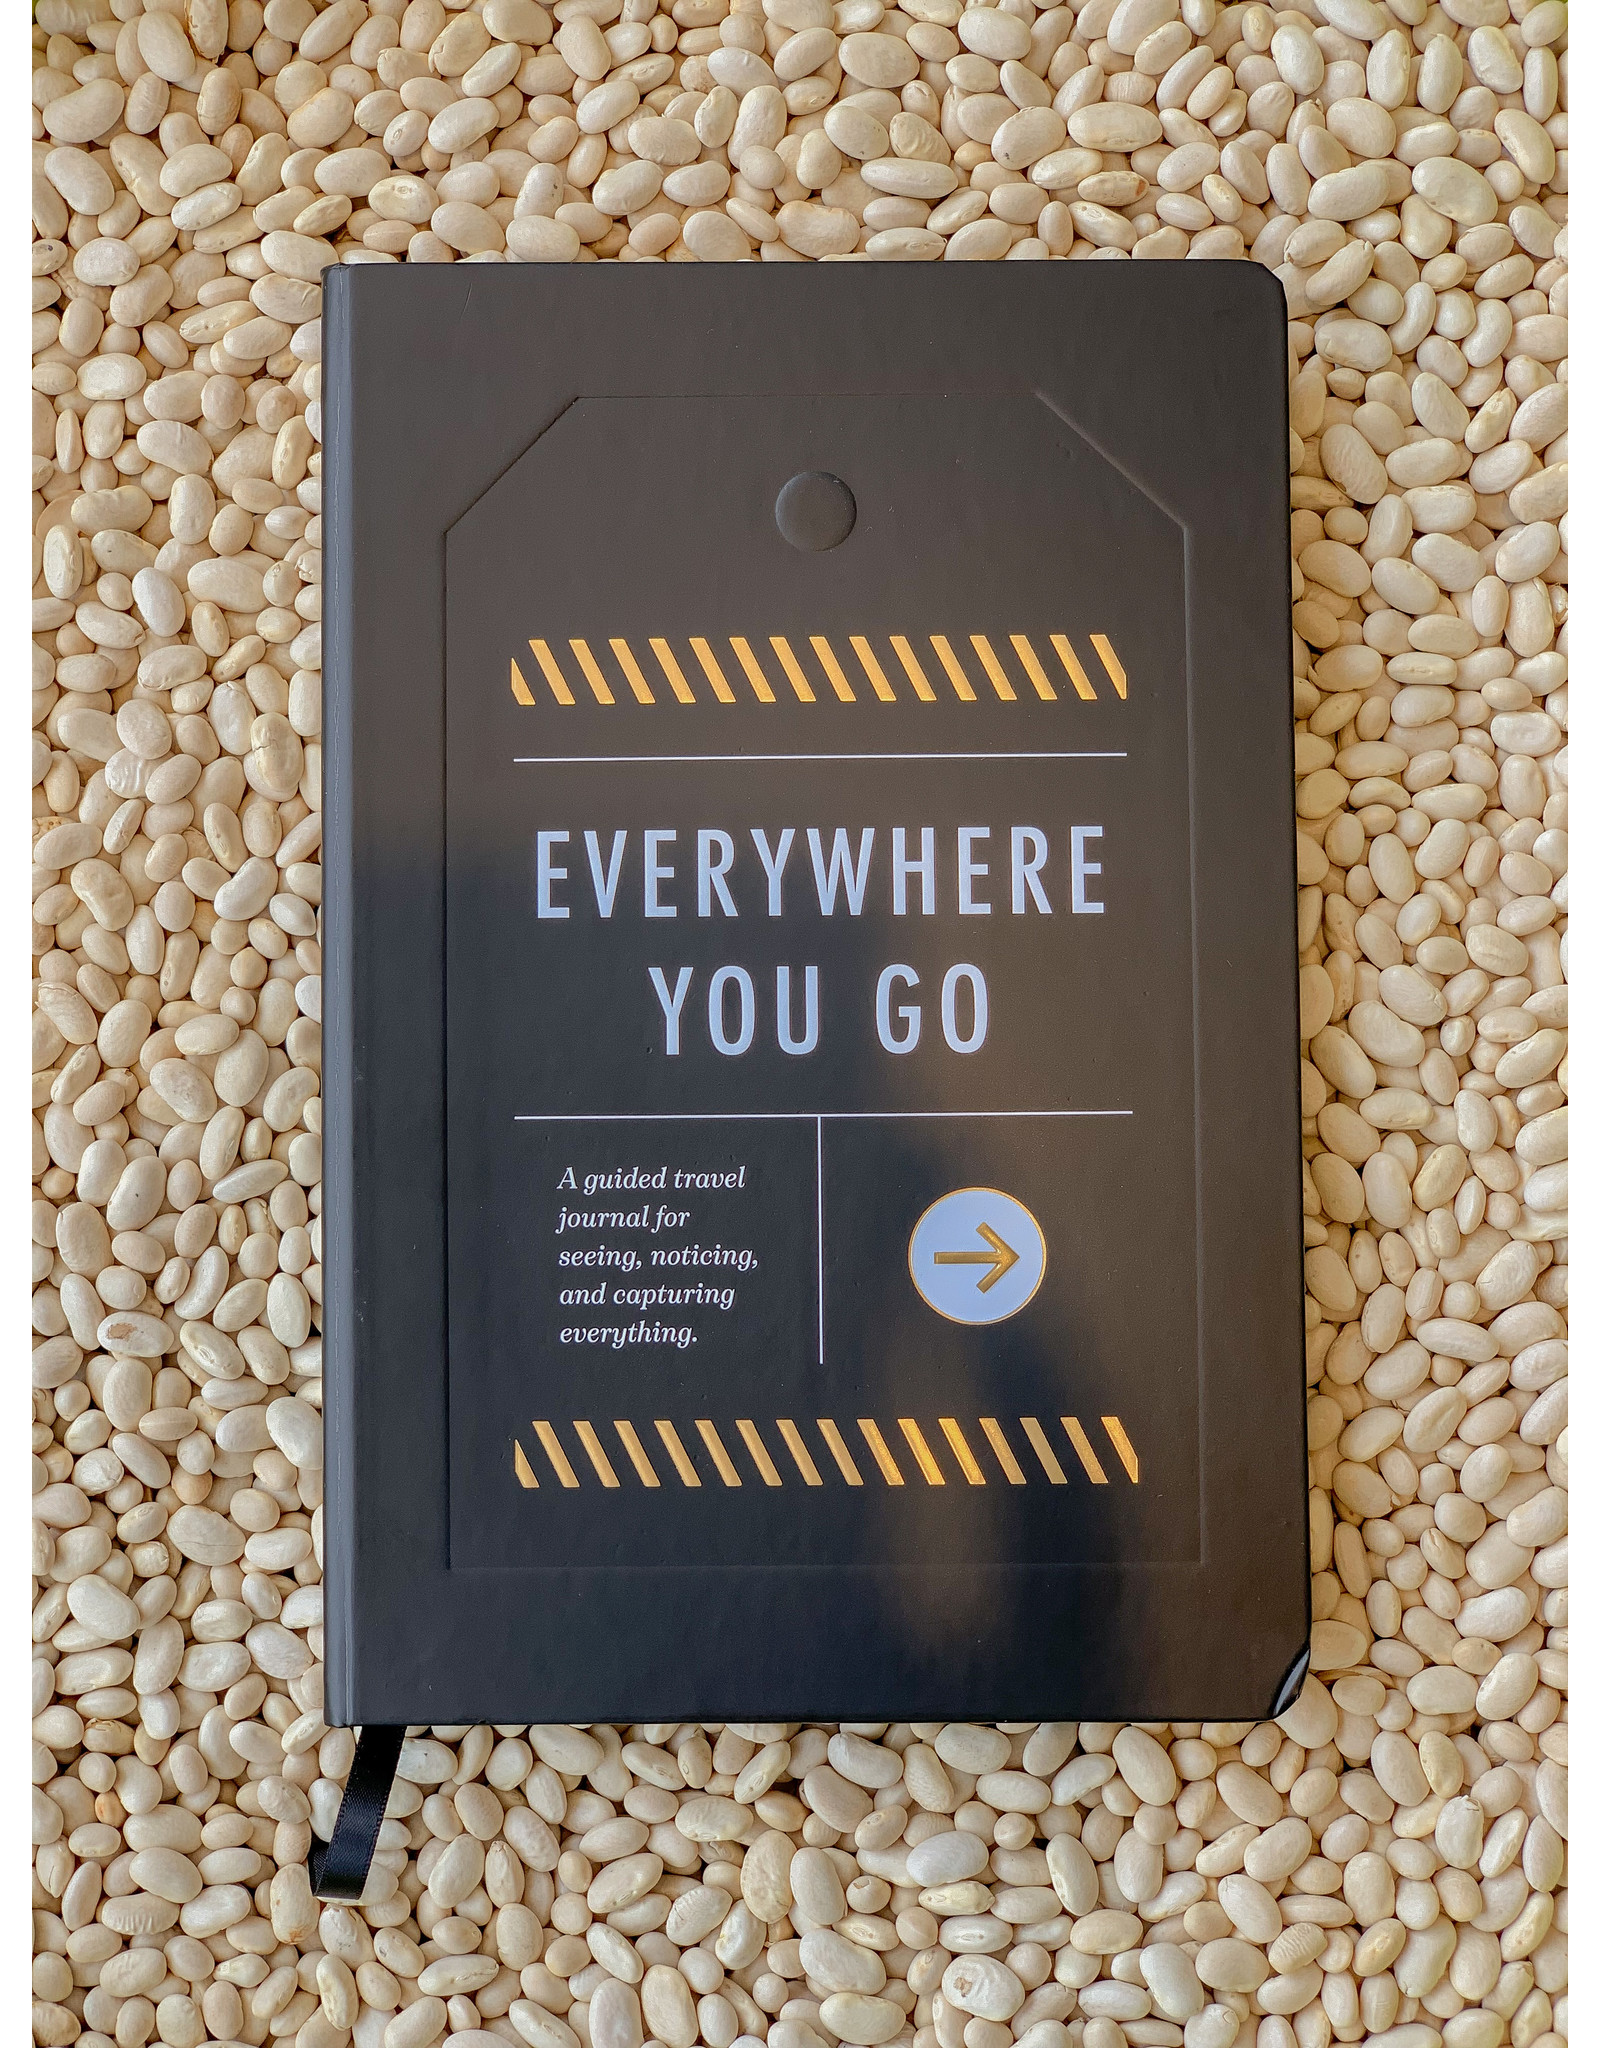 Guided Travel Journal, Everywhere You Go